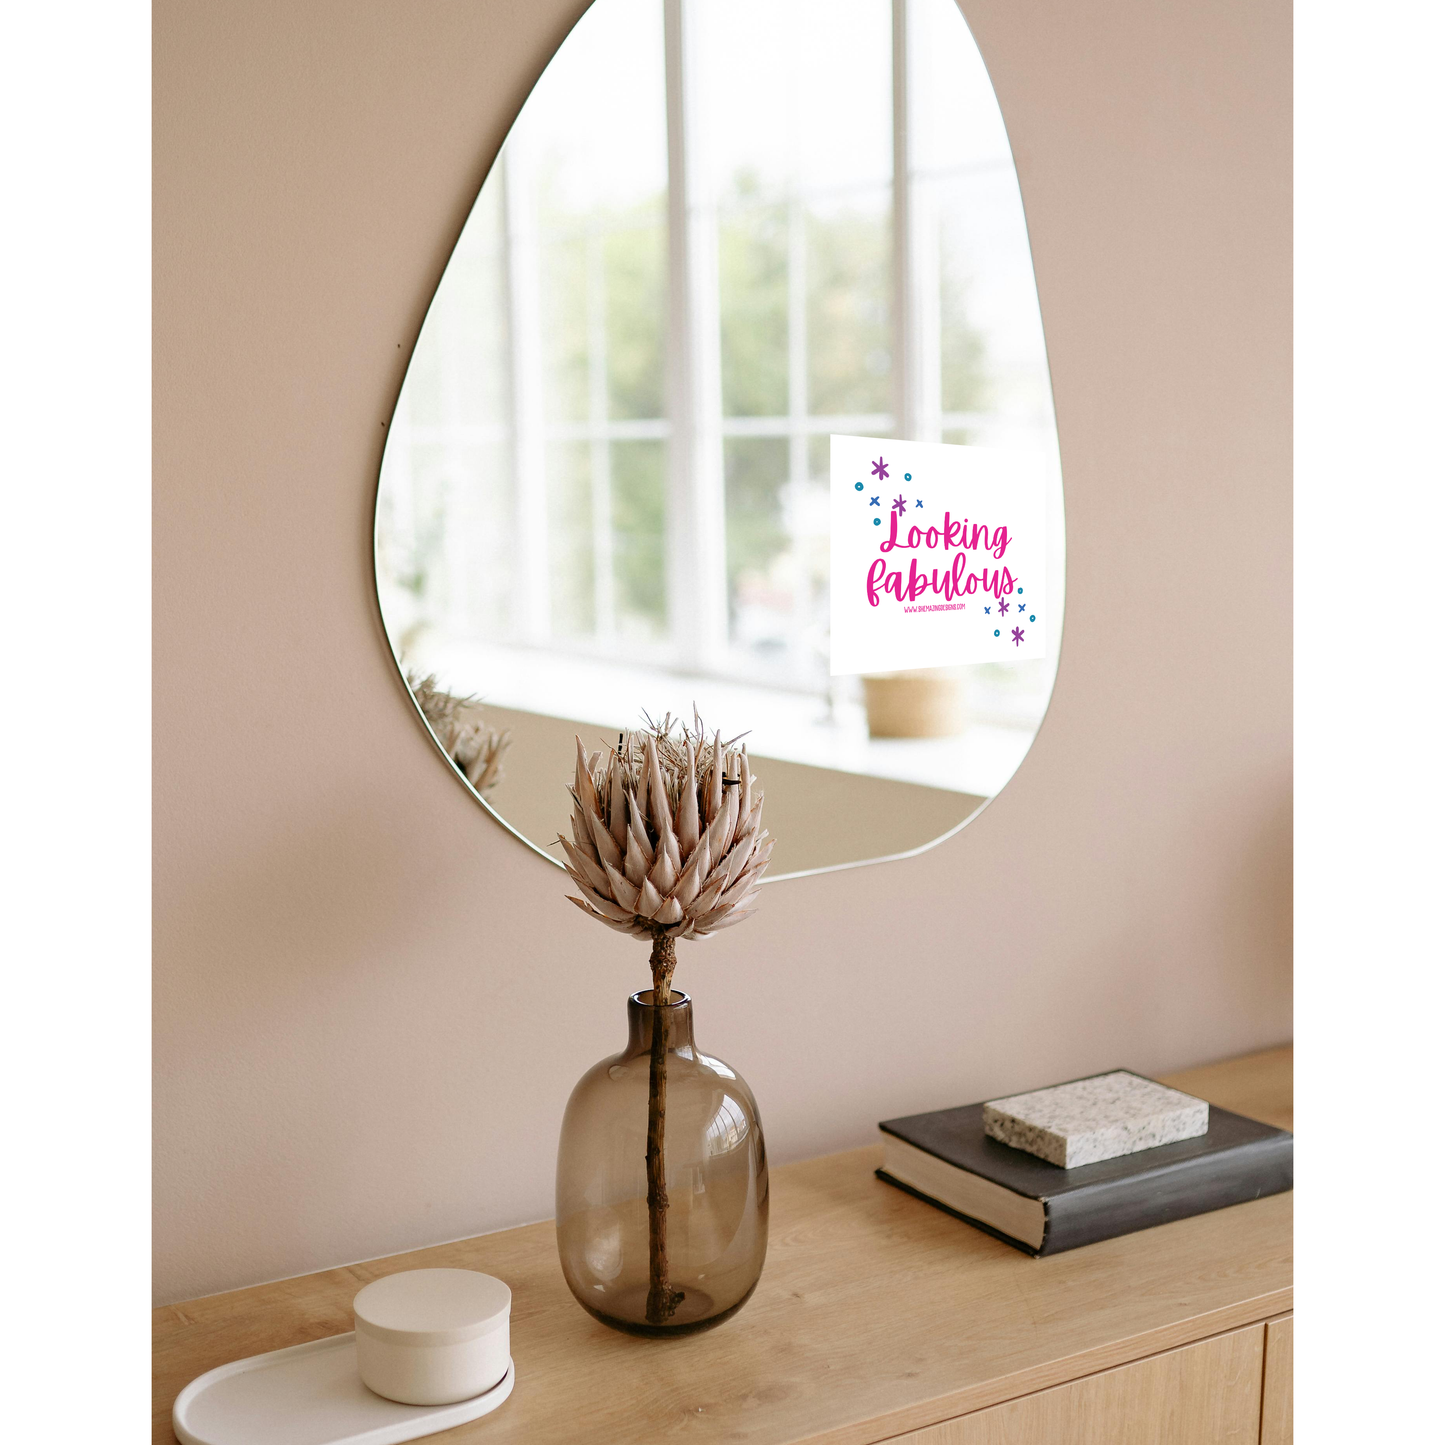 Looking Fabulous Mirror Cling Decal